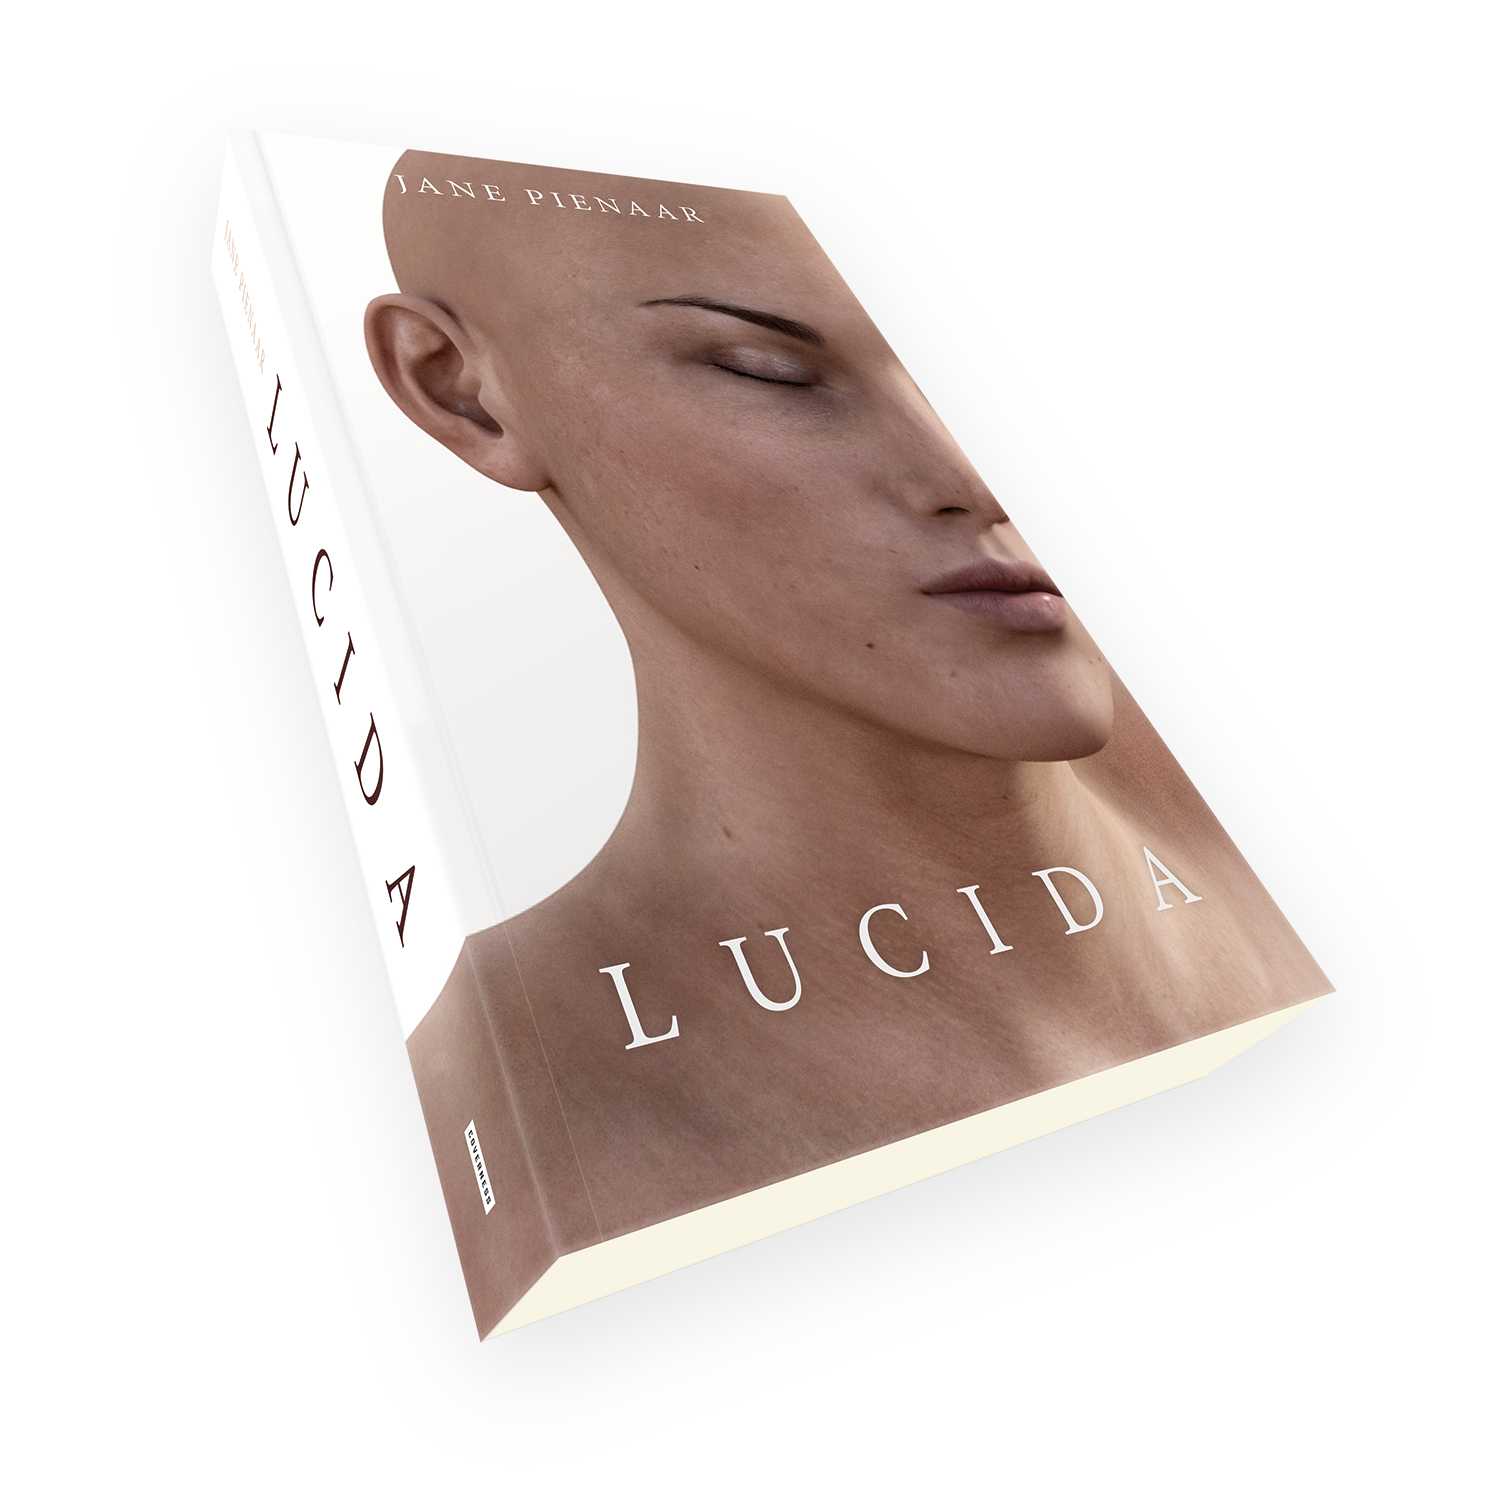 'Lucida' is a bespoke cover design for a modern scifi novel. The book cover was designed by Mark Thomas, of coverness.com. To find out more about my book design services, please visit www.coverness.com.